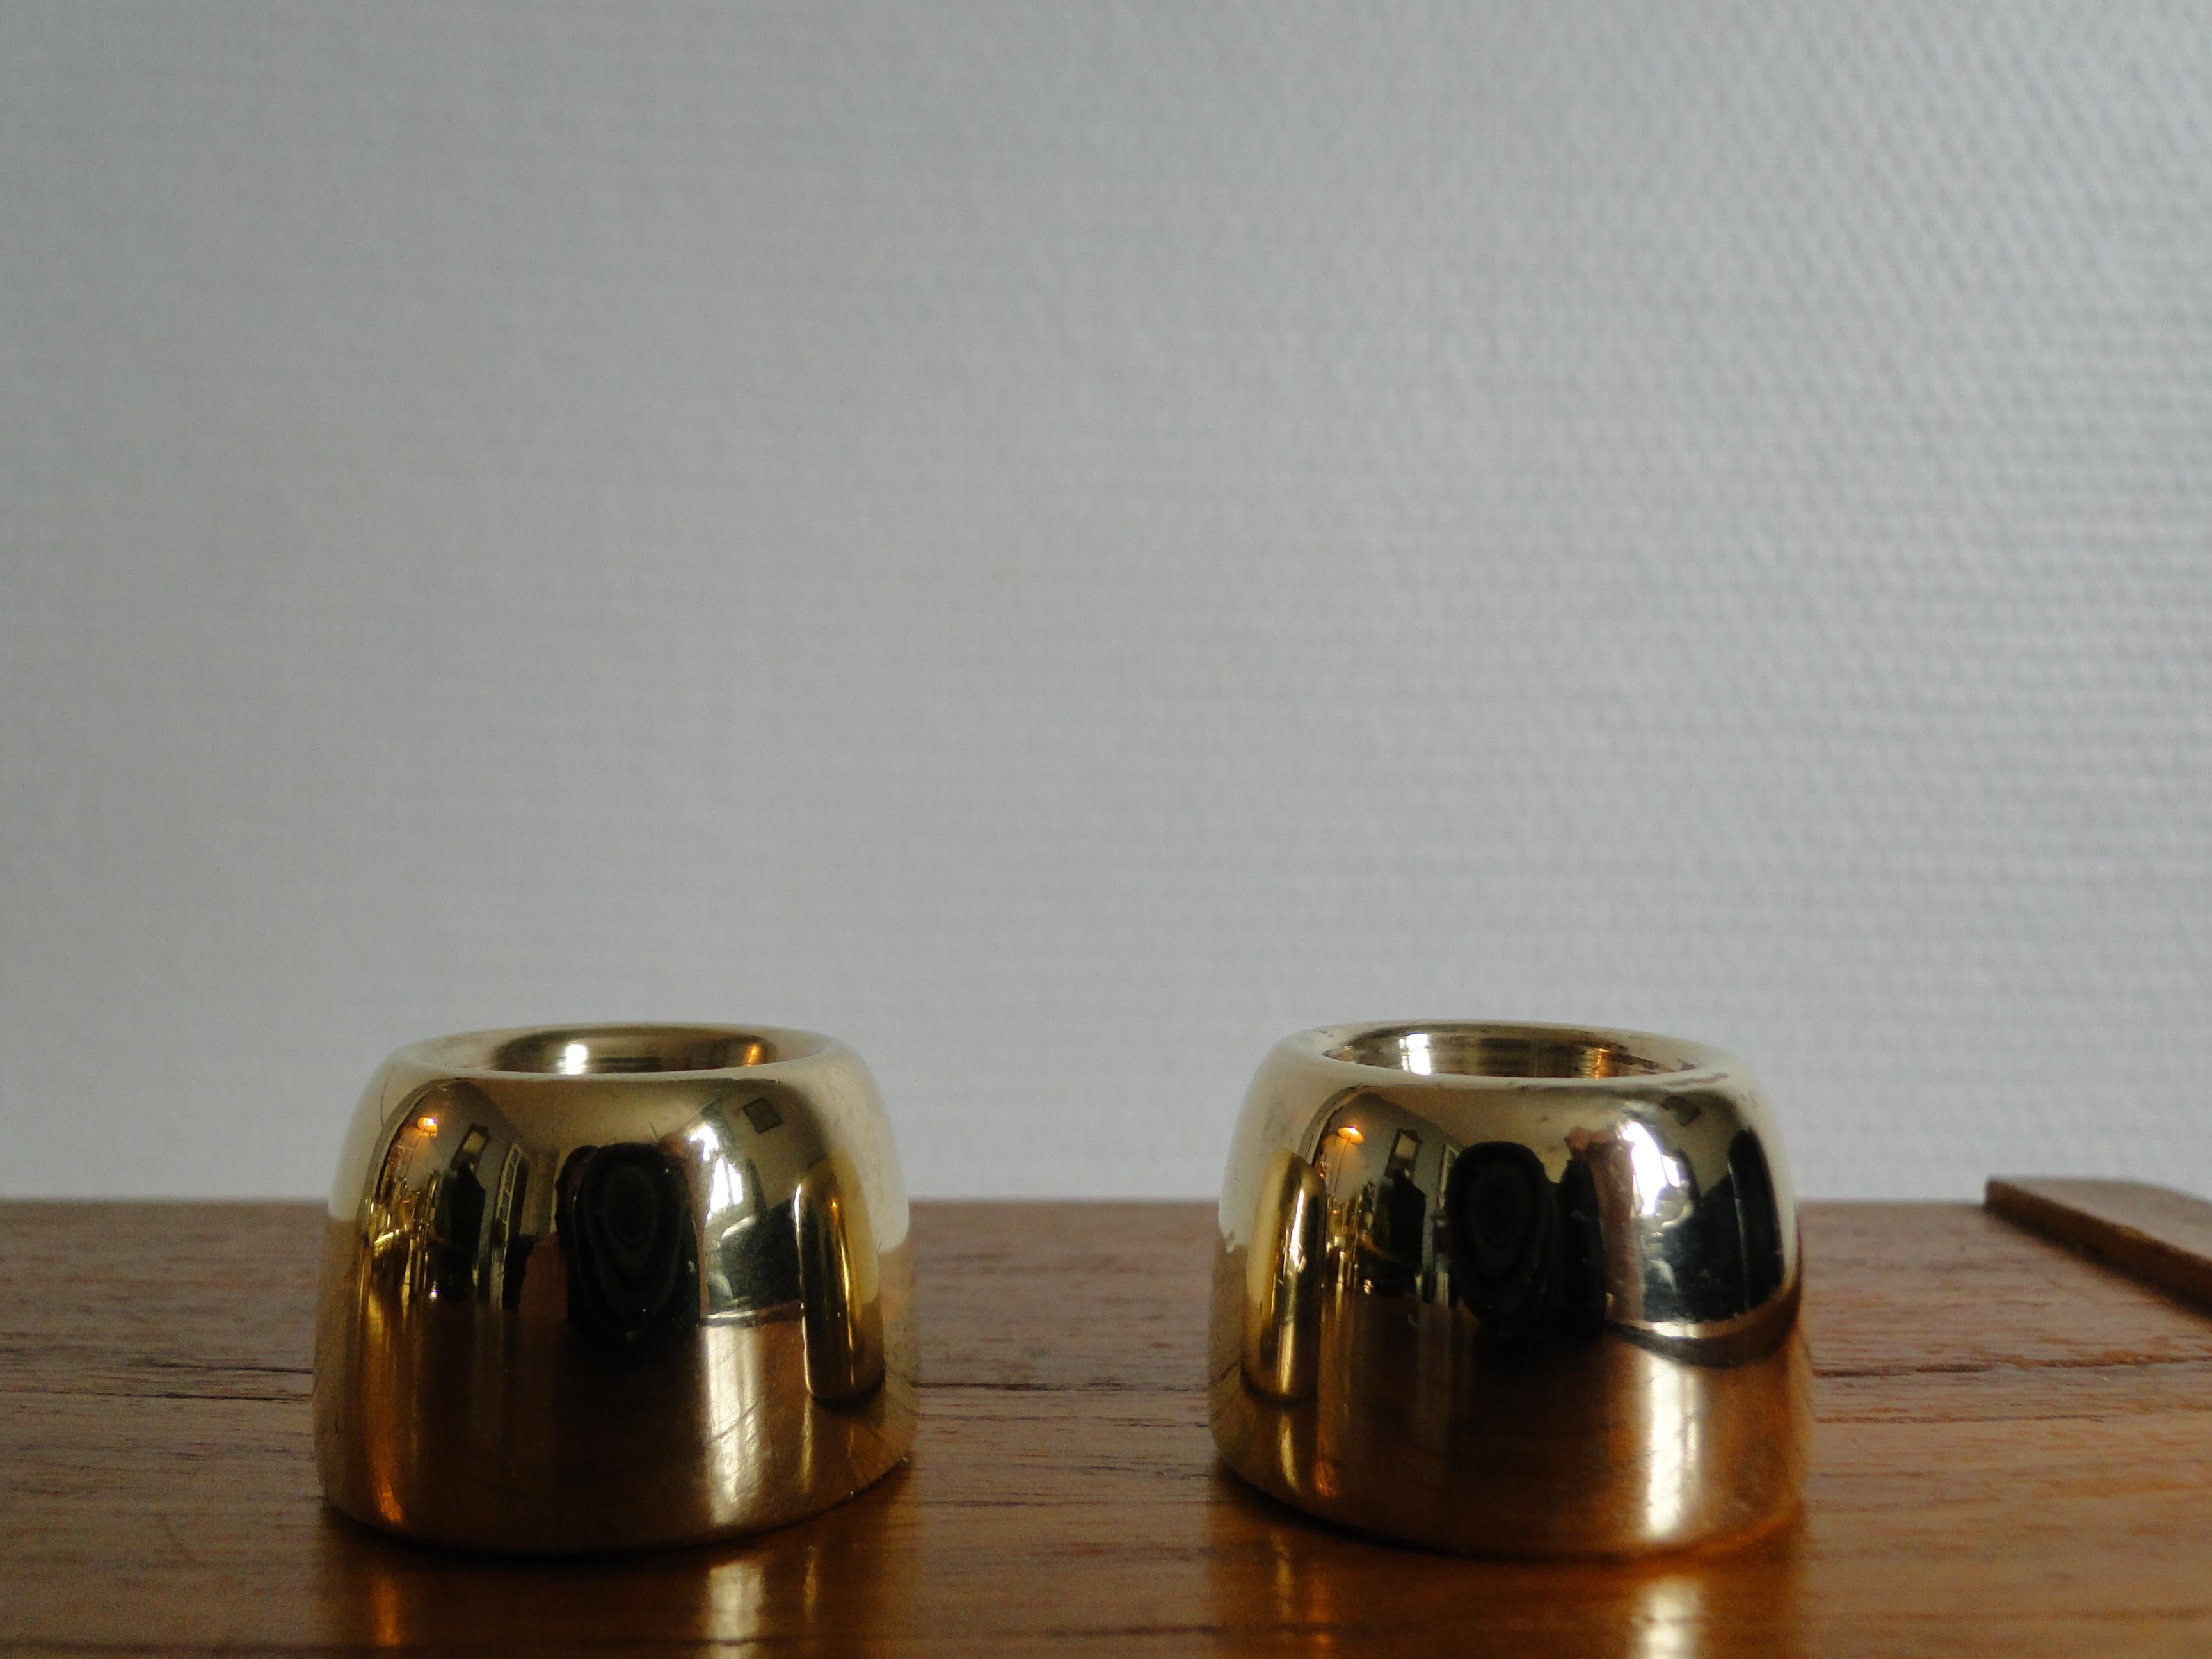 Set of 2 model L97 brass candlesticks by Hans Agne Jakobsson for Markaryd, Sweden, 1960s, in good condition.